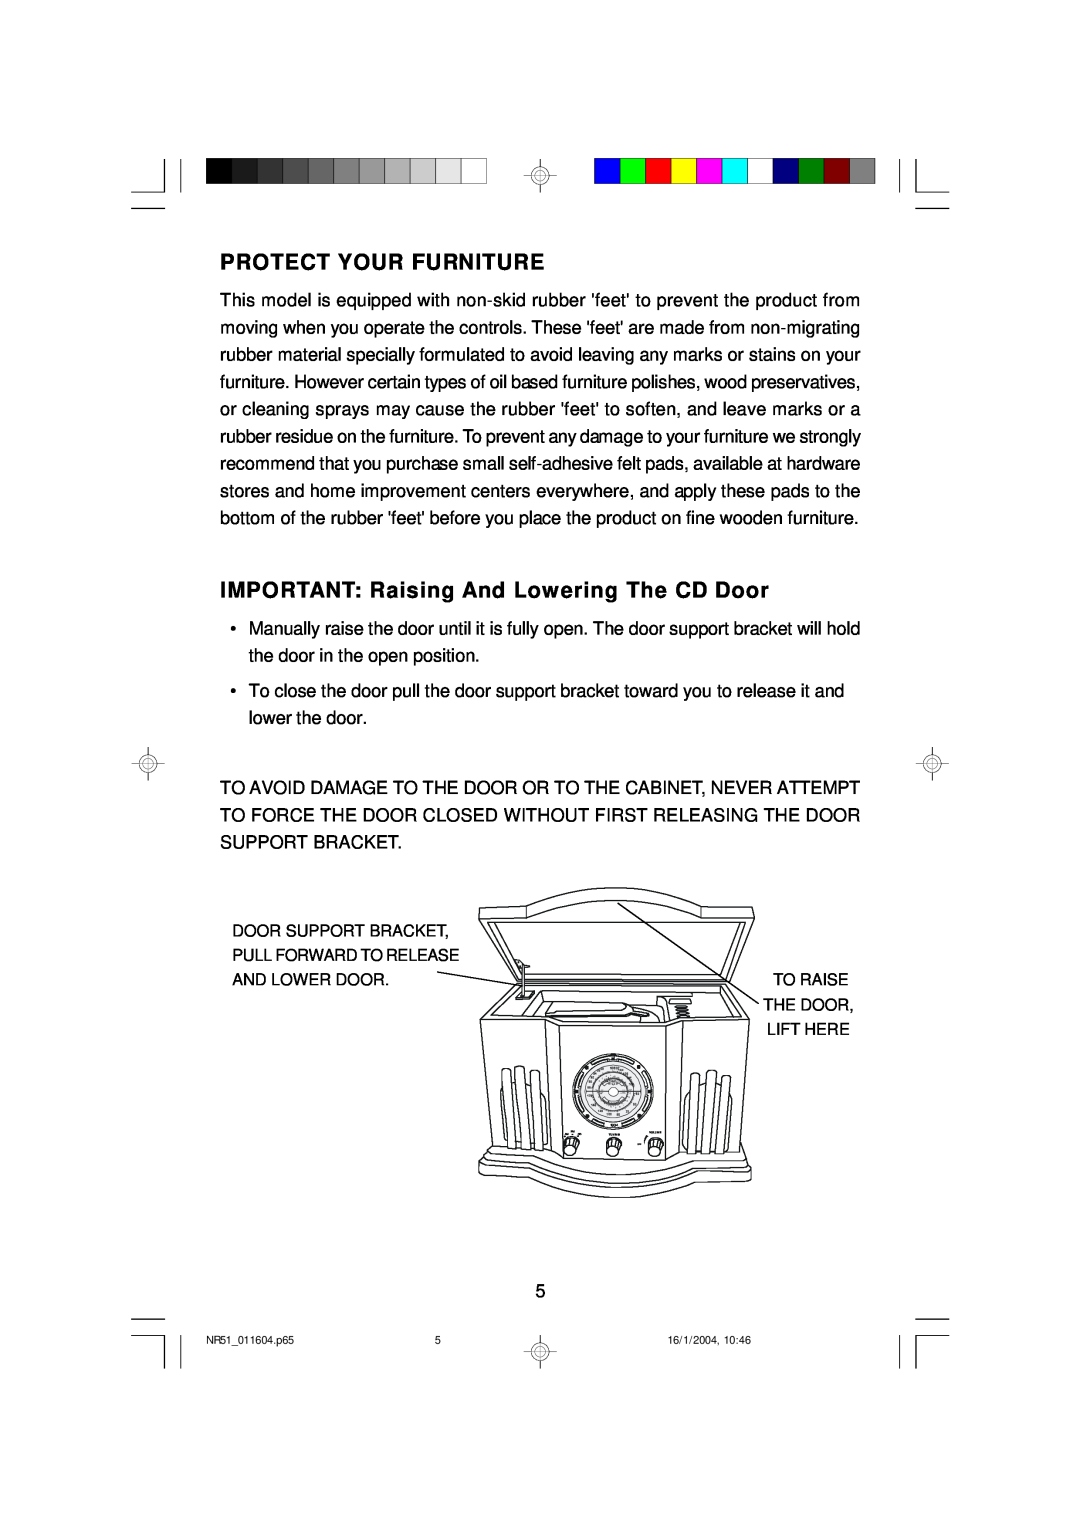 Emerson NR51 owner manual Protect Your Furniture, IMPORTANT: Raising And Lowering The CD Door 